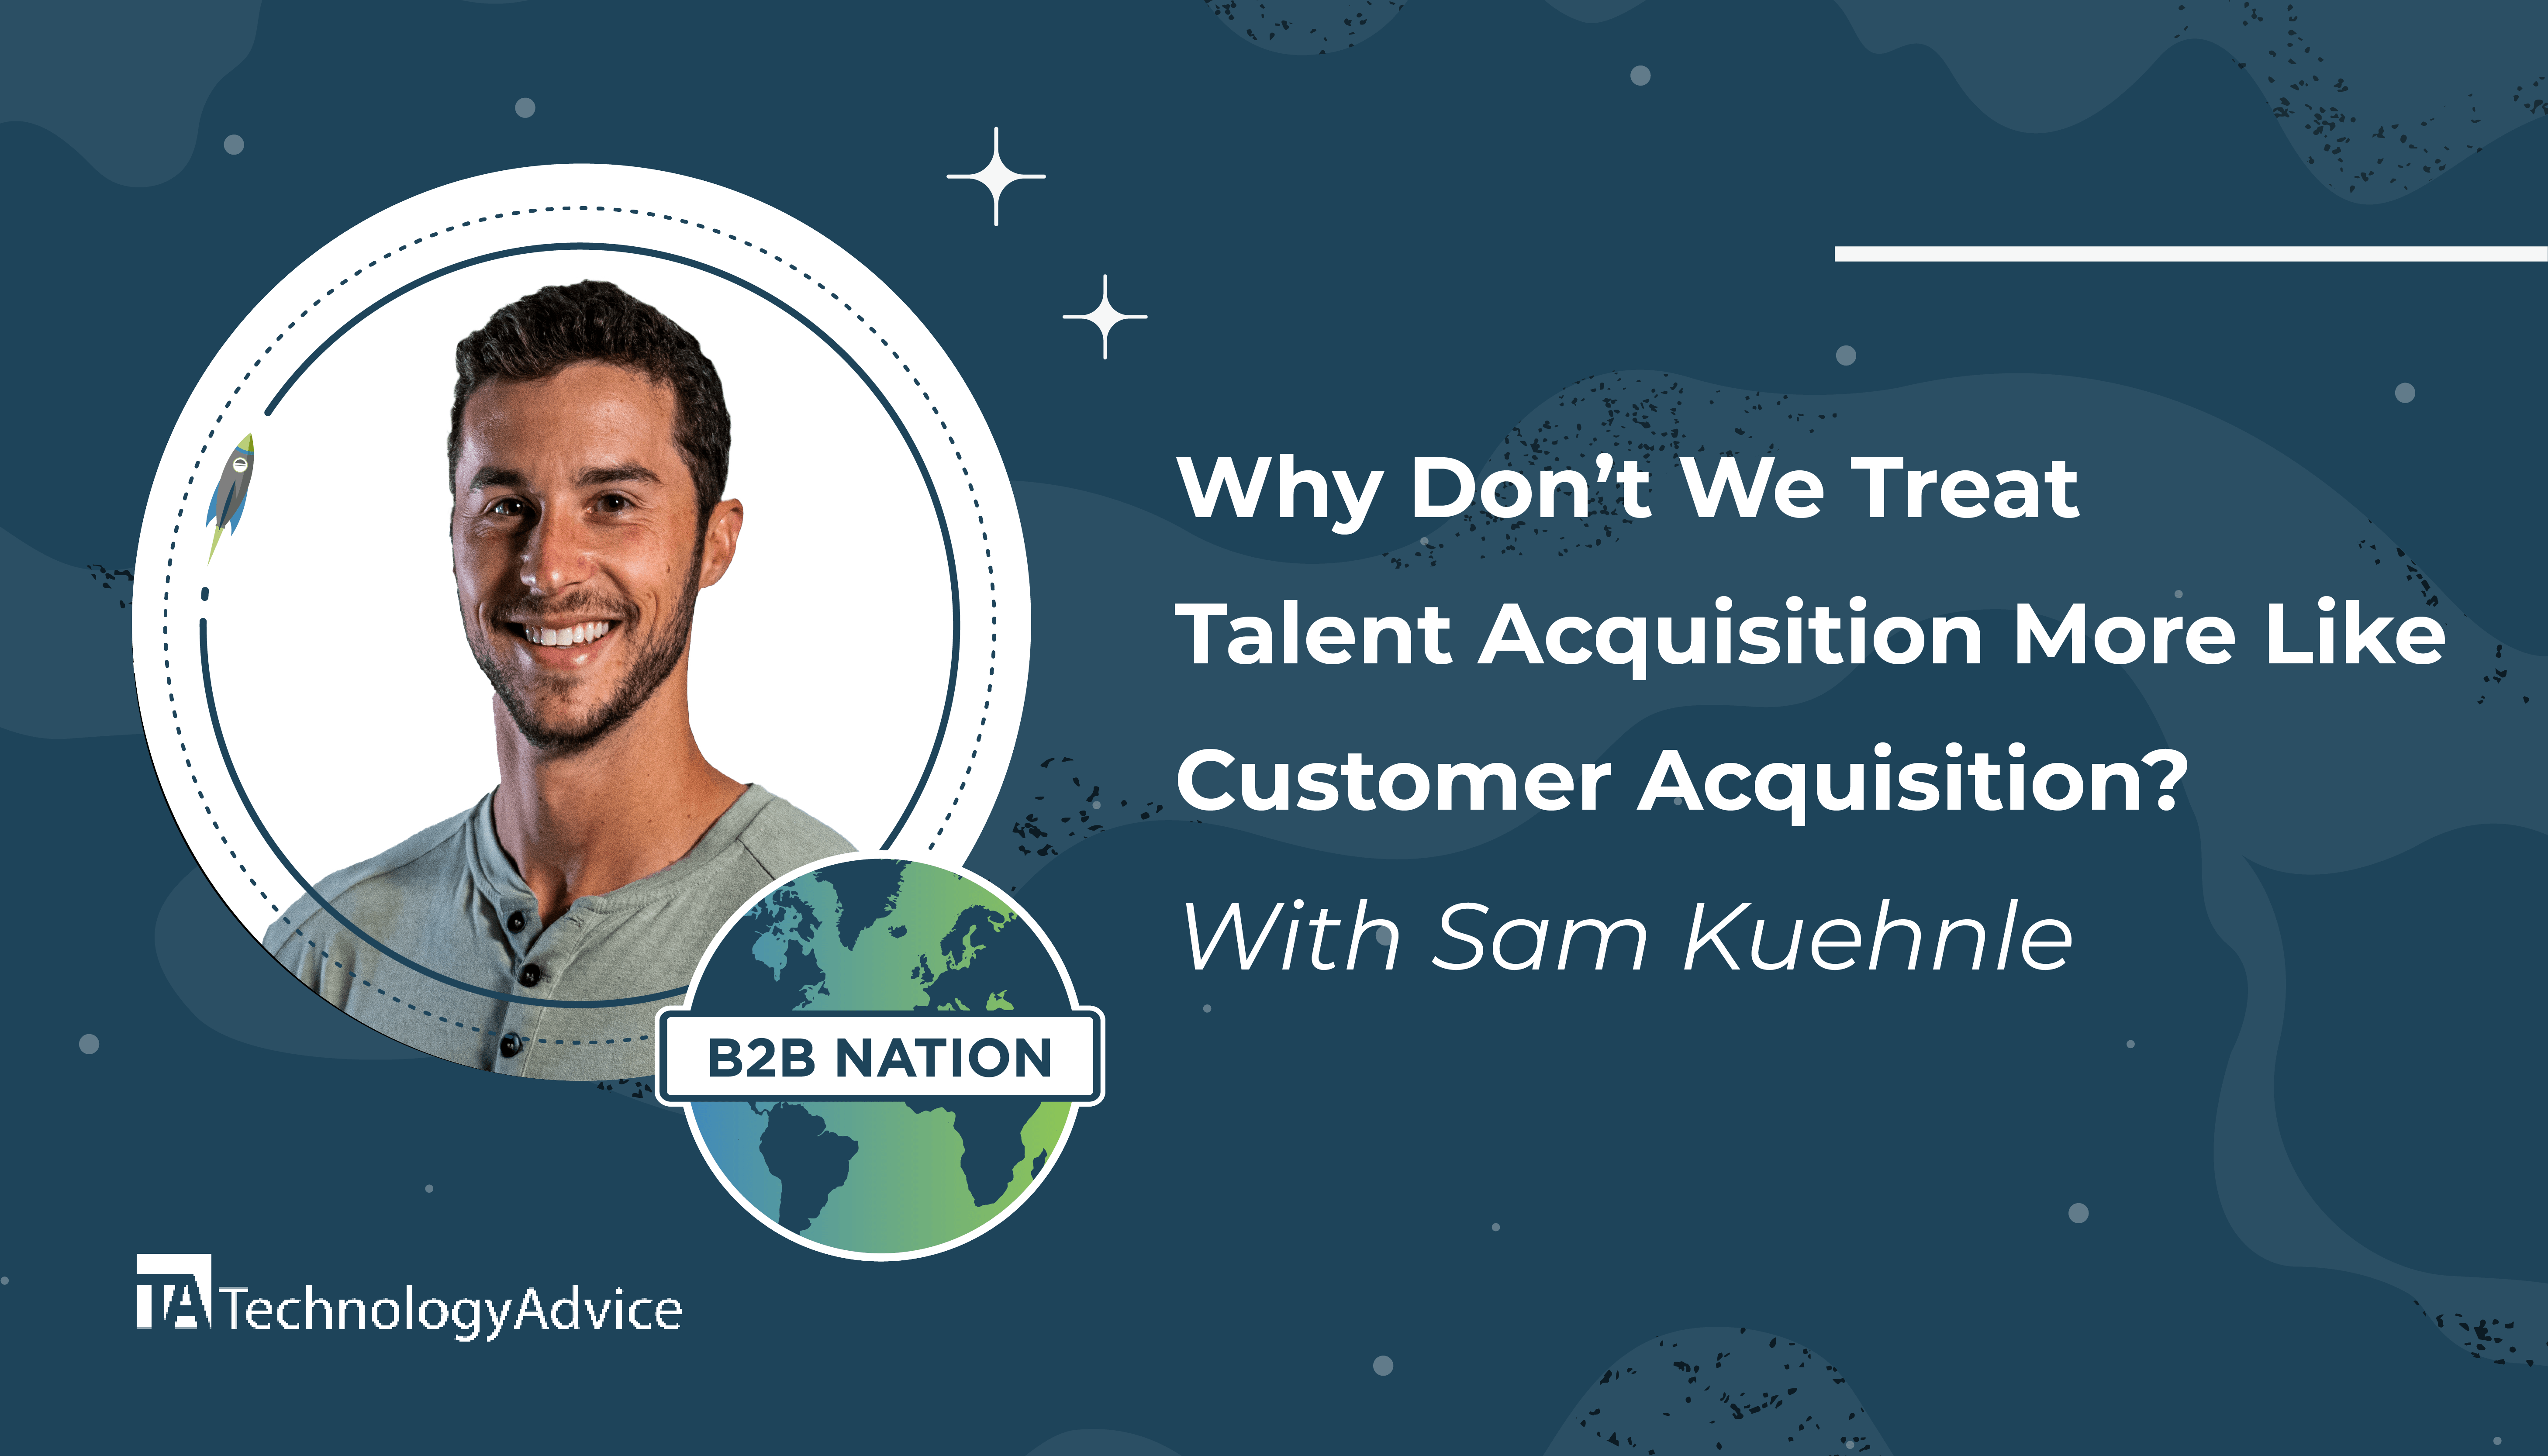 Why Don’t We Treat Talent Acquisition More Like Customer Acquisition?